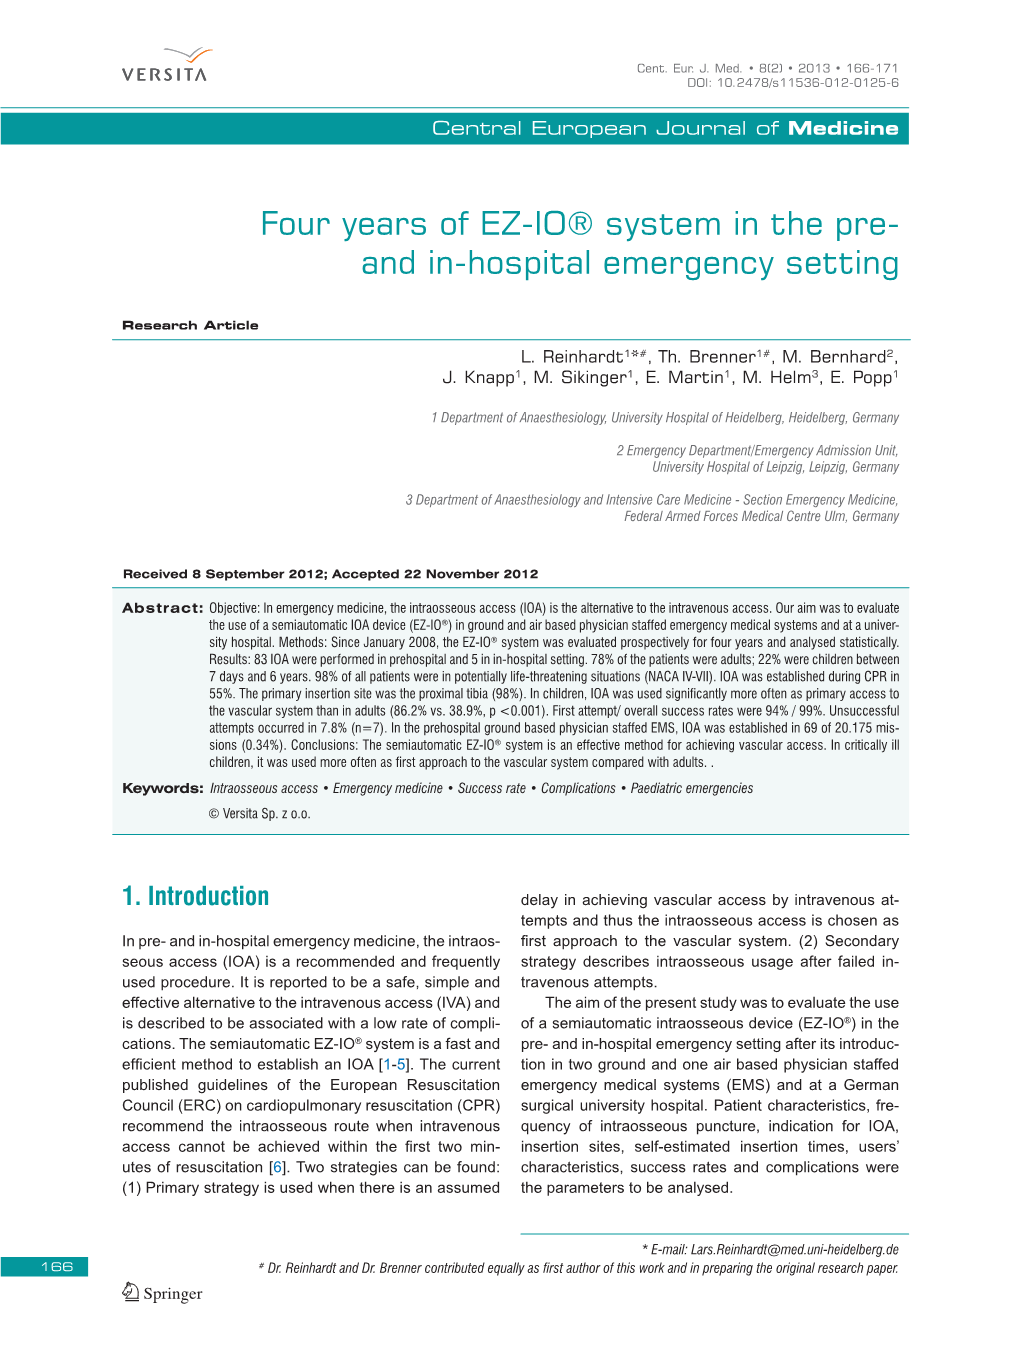 Four Years of EZ-IO® System in the Pre- and In-Hospital Emergency Setting